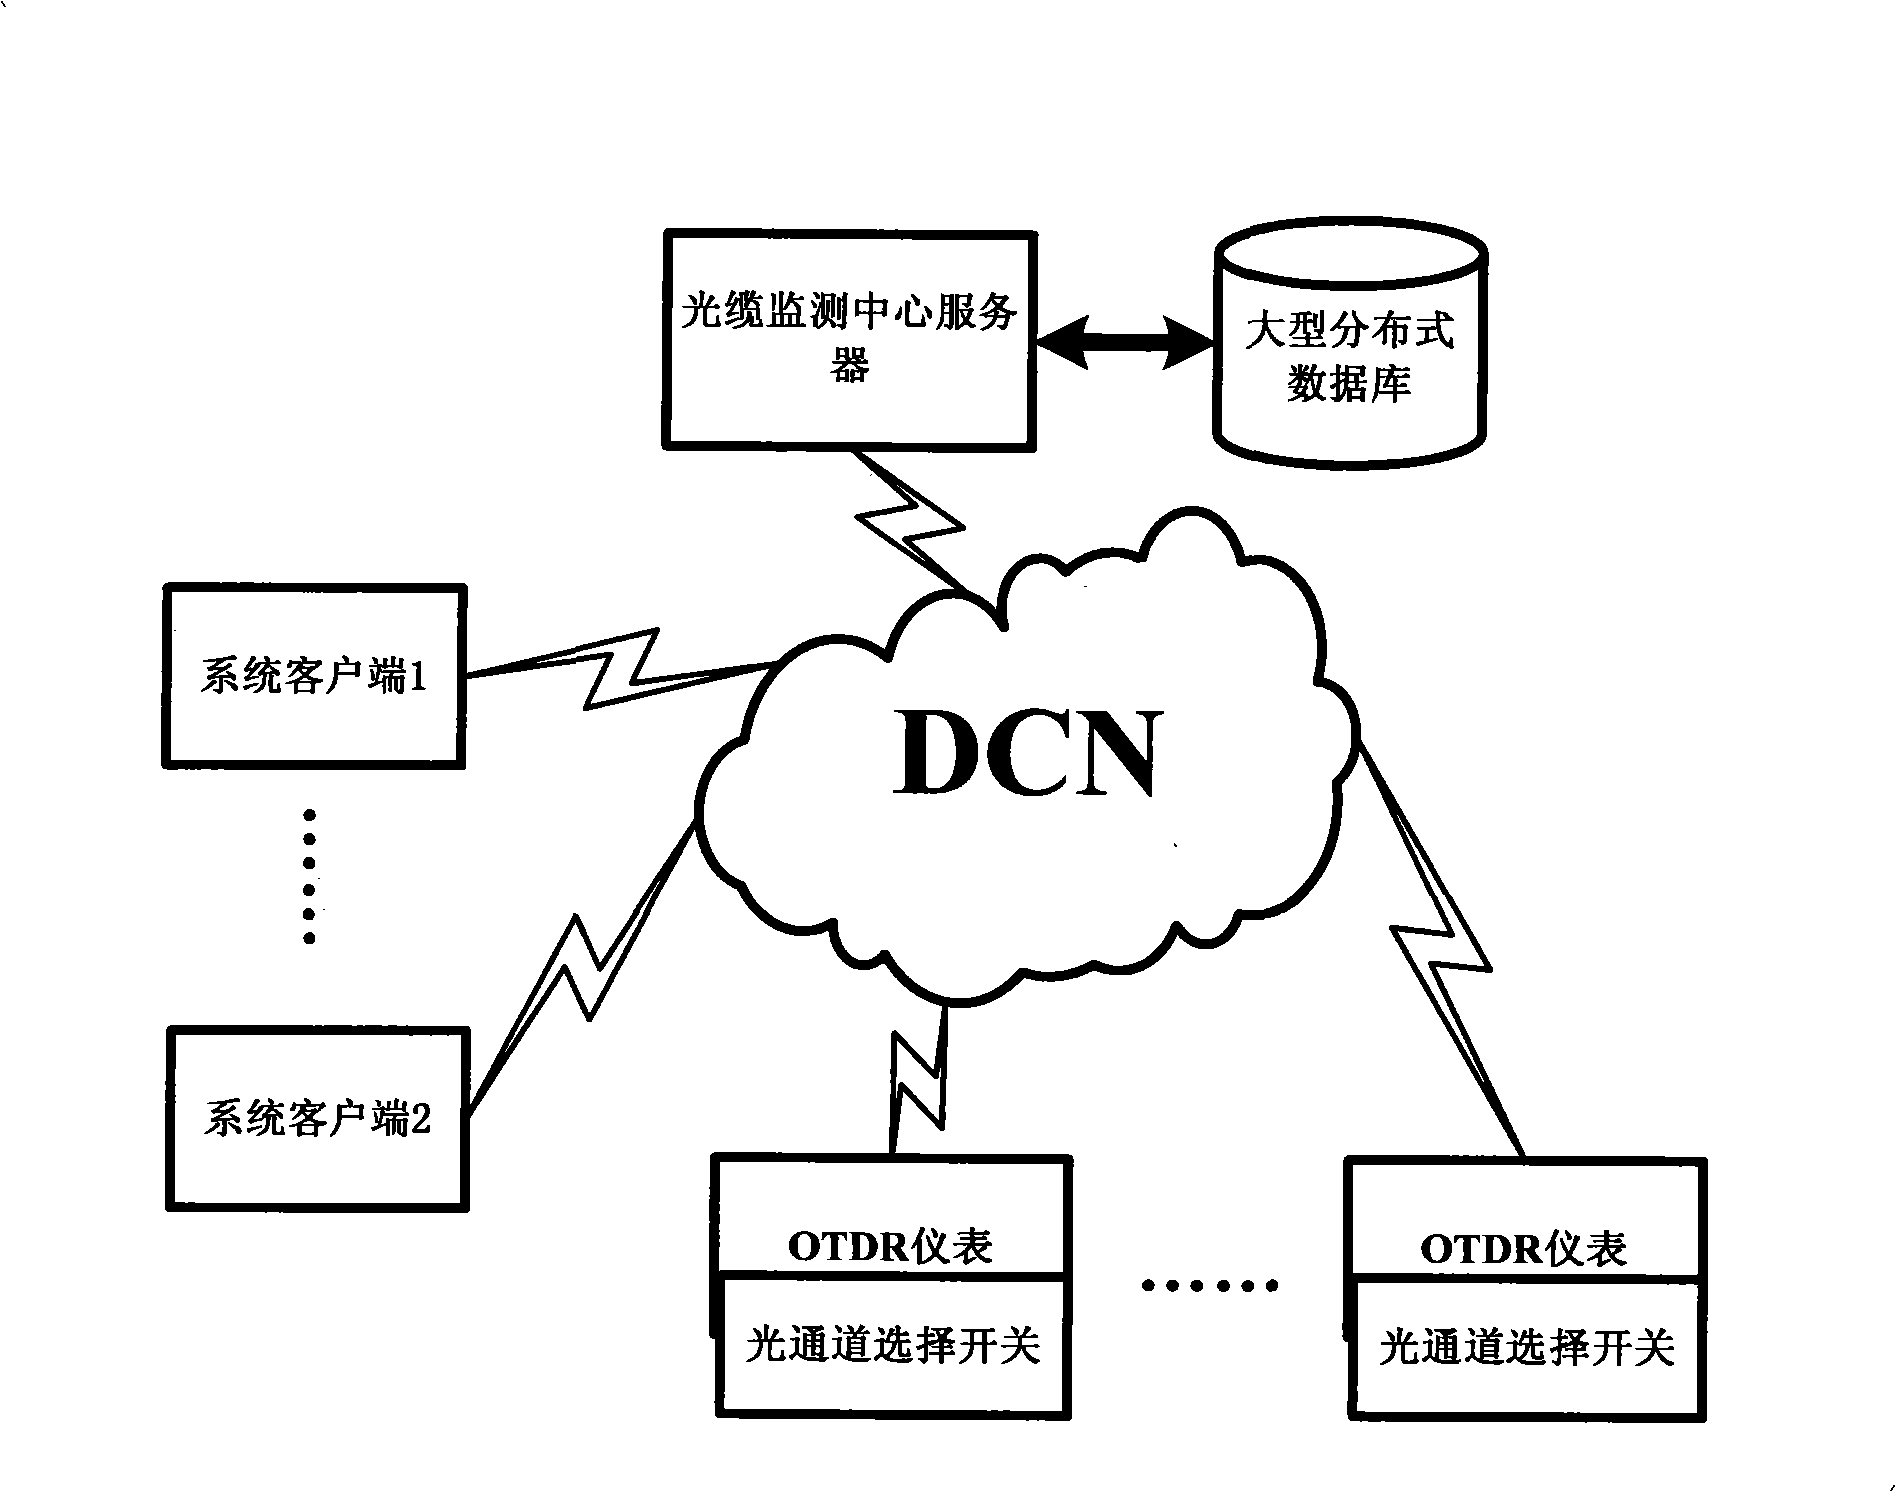 Optical cable monitoring device